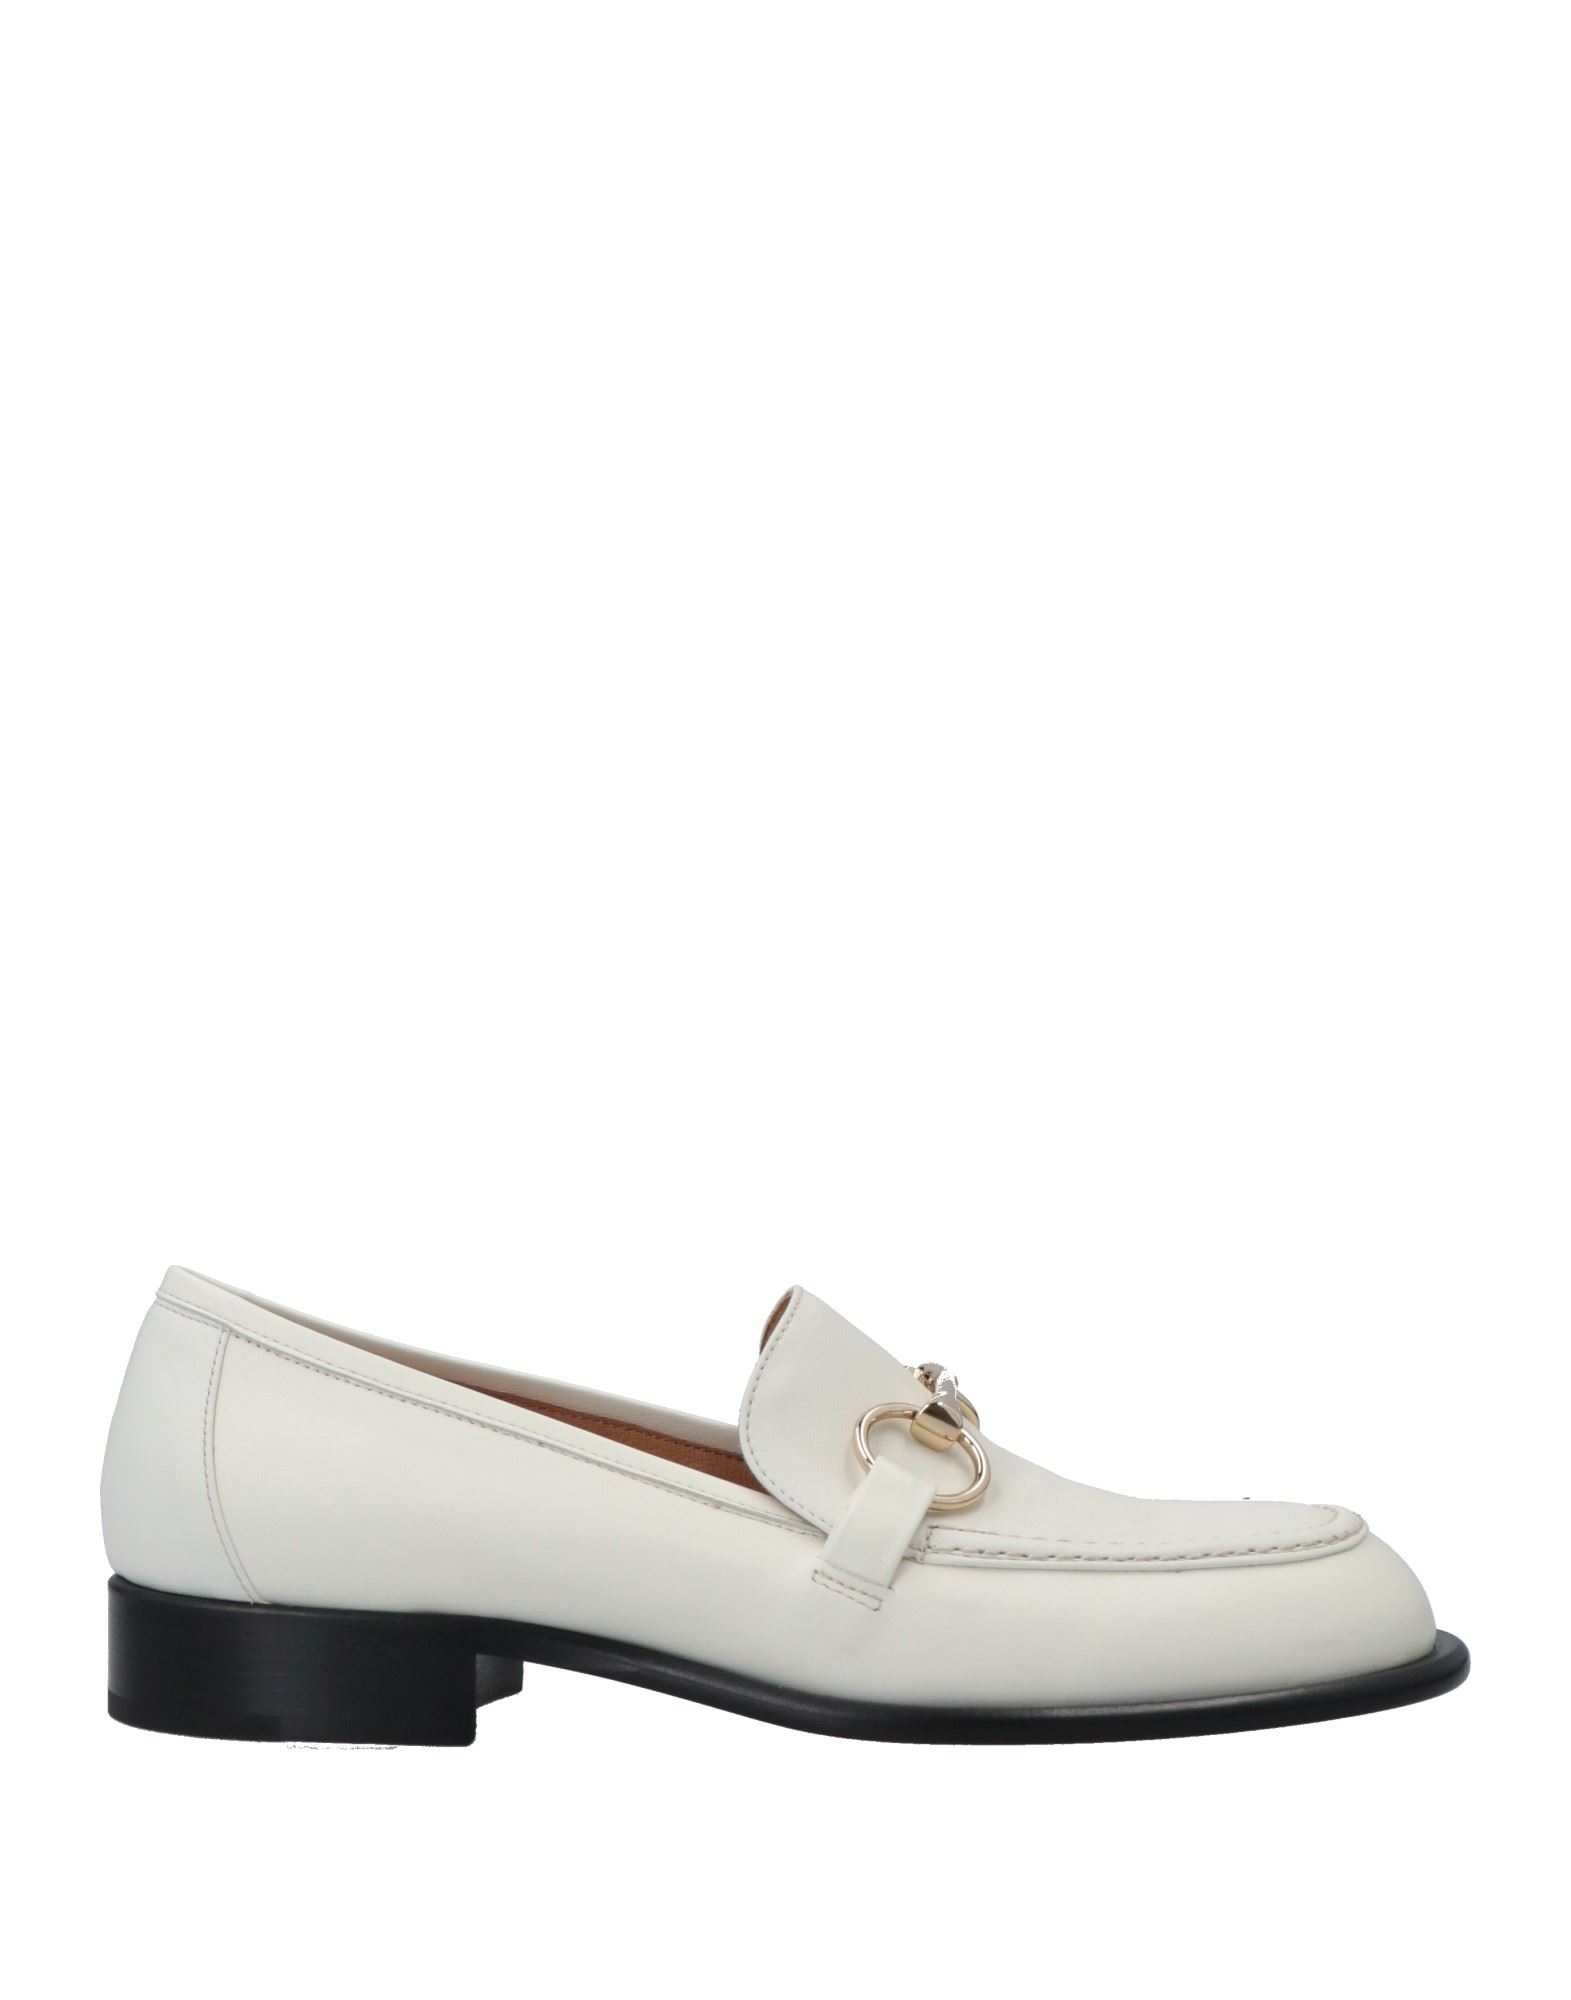 Pomme D'or Woman Loafers White Size 8 Soft Leather